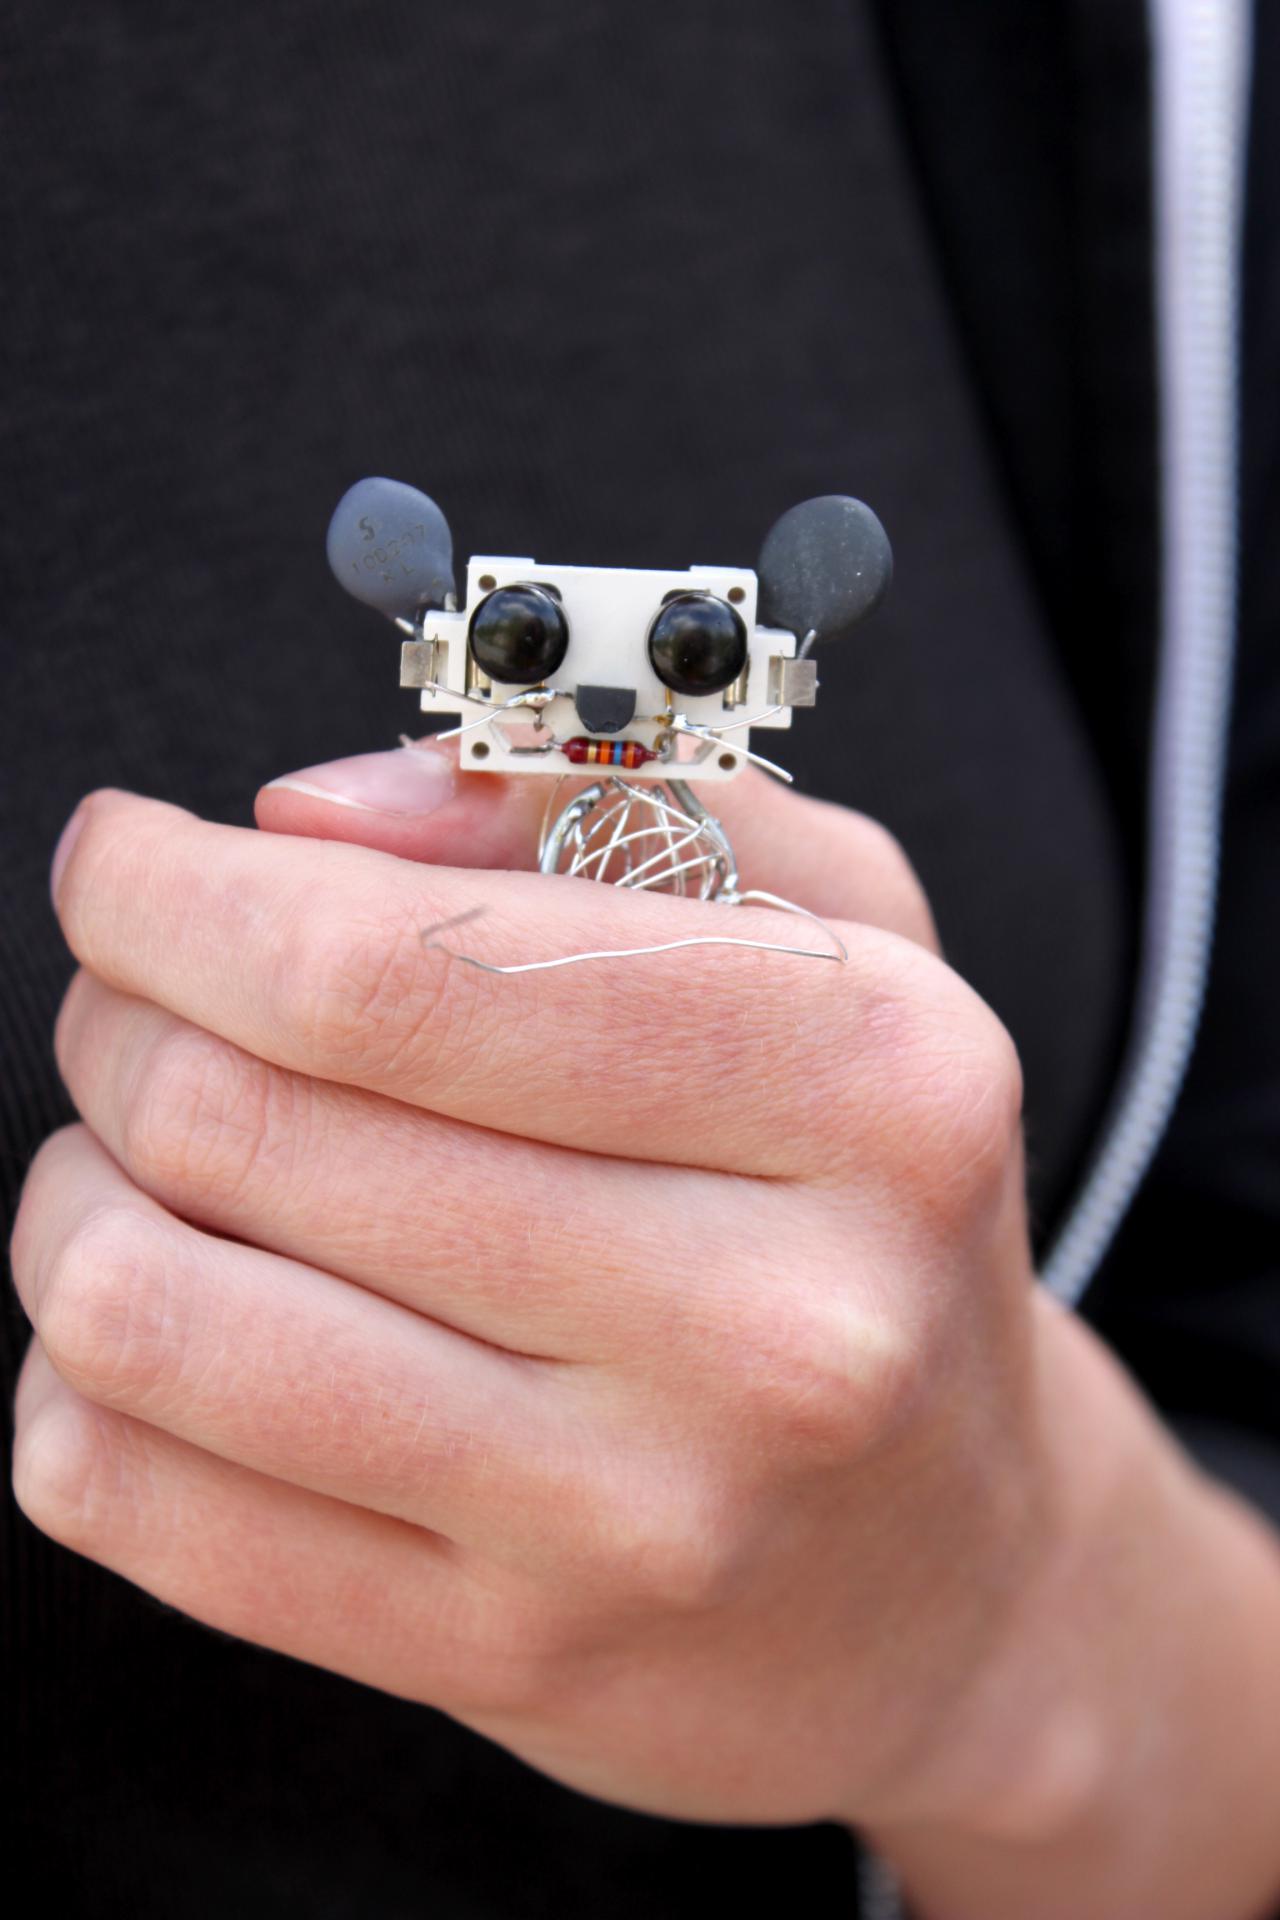 One hand holds a mouse made of electrical components at an event of the cultural academy.